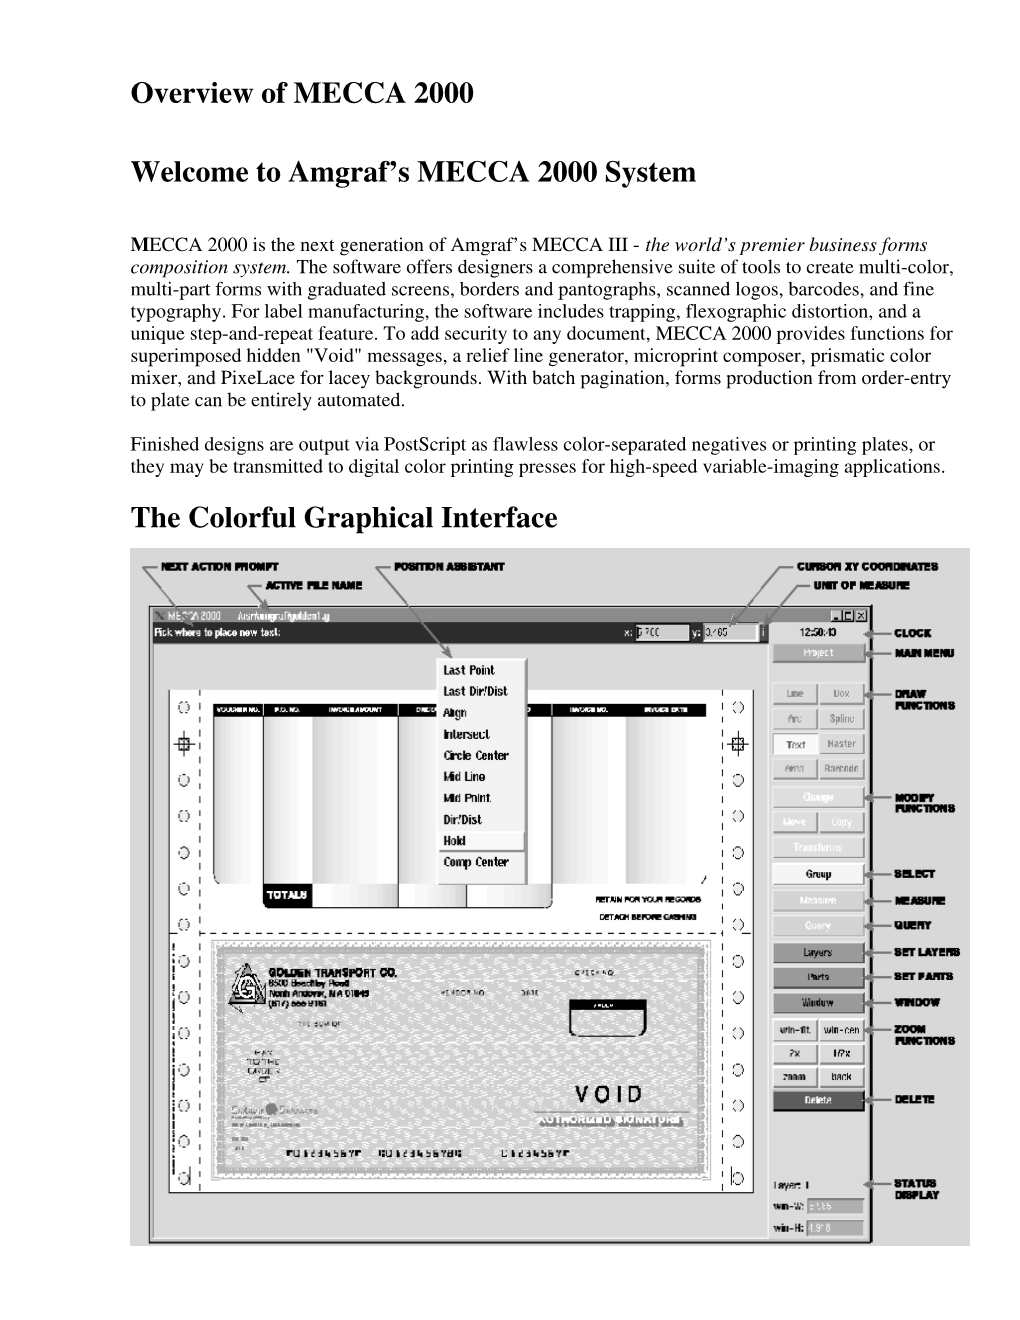 Overview of MECCA 2000 Welcome to Amgraf's MECCA 2000 System